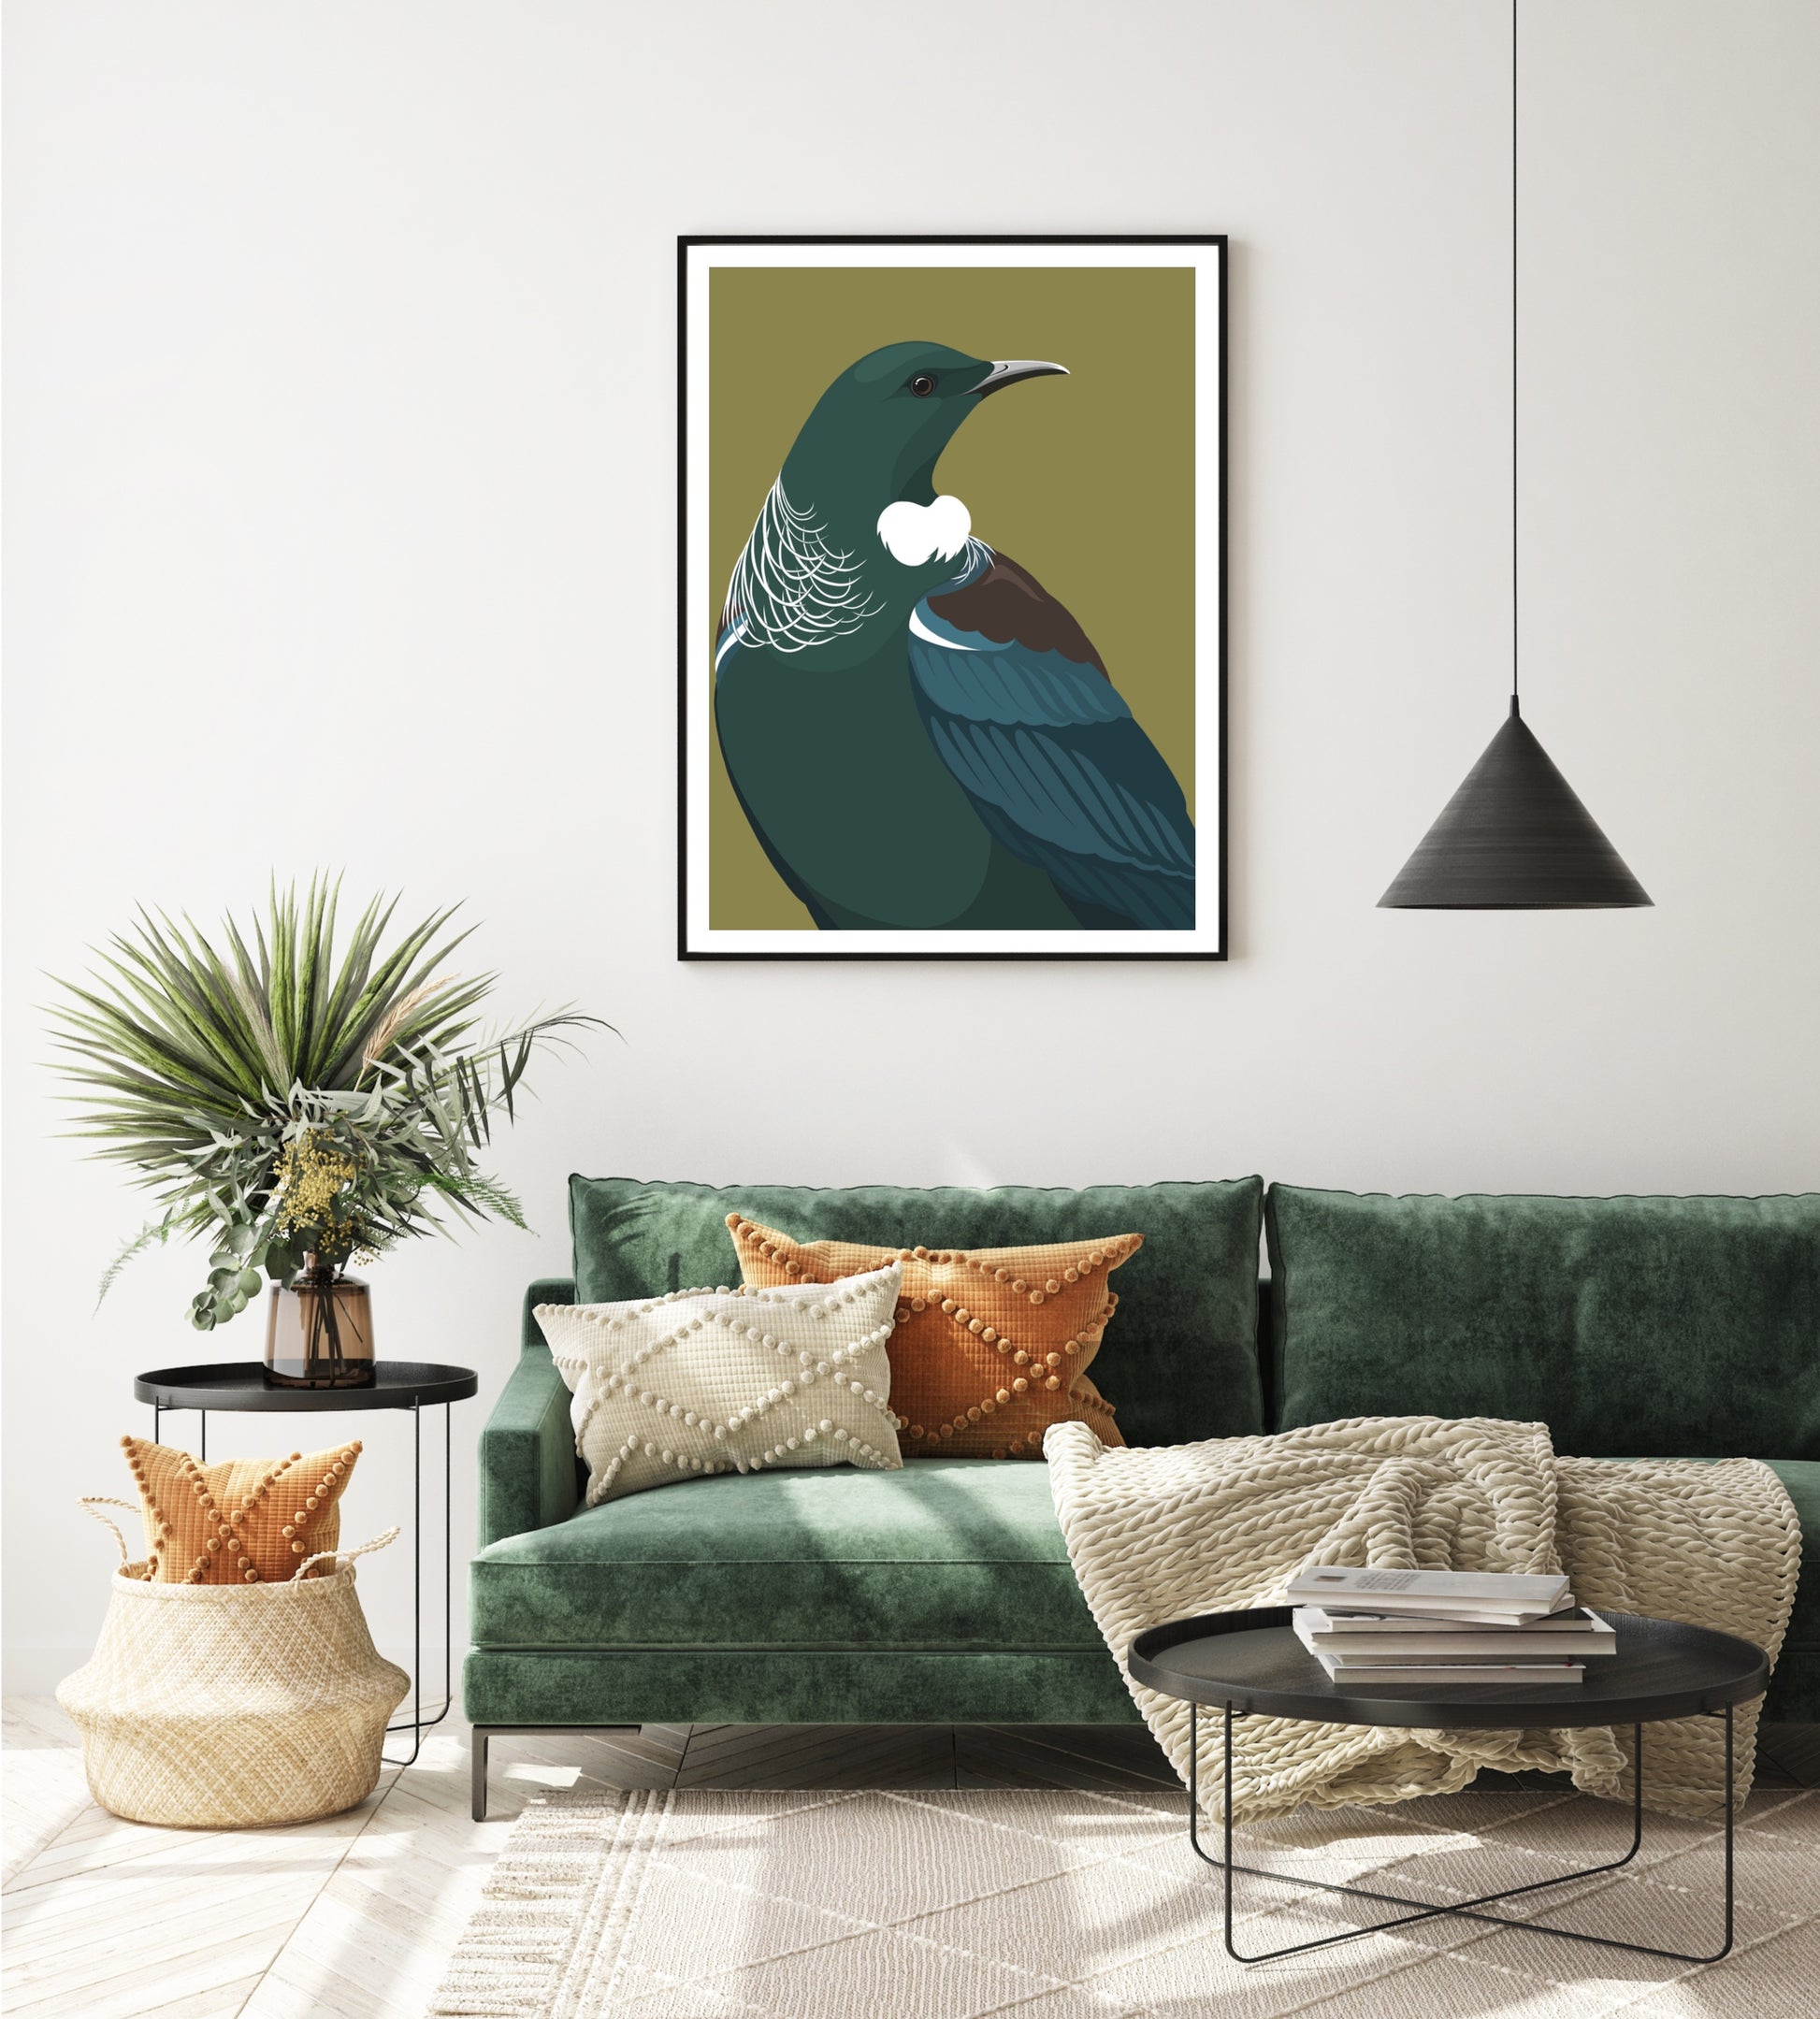 Framed art print of the Tui bird in A1 size, by Hansby Design New Zealand